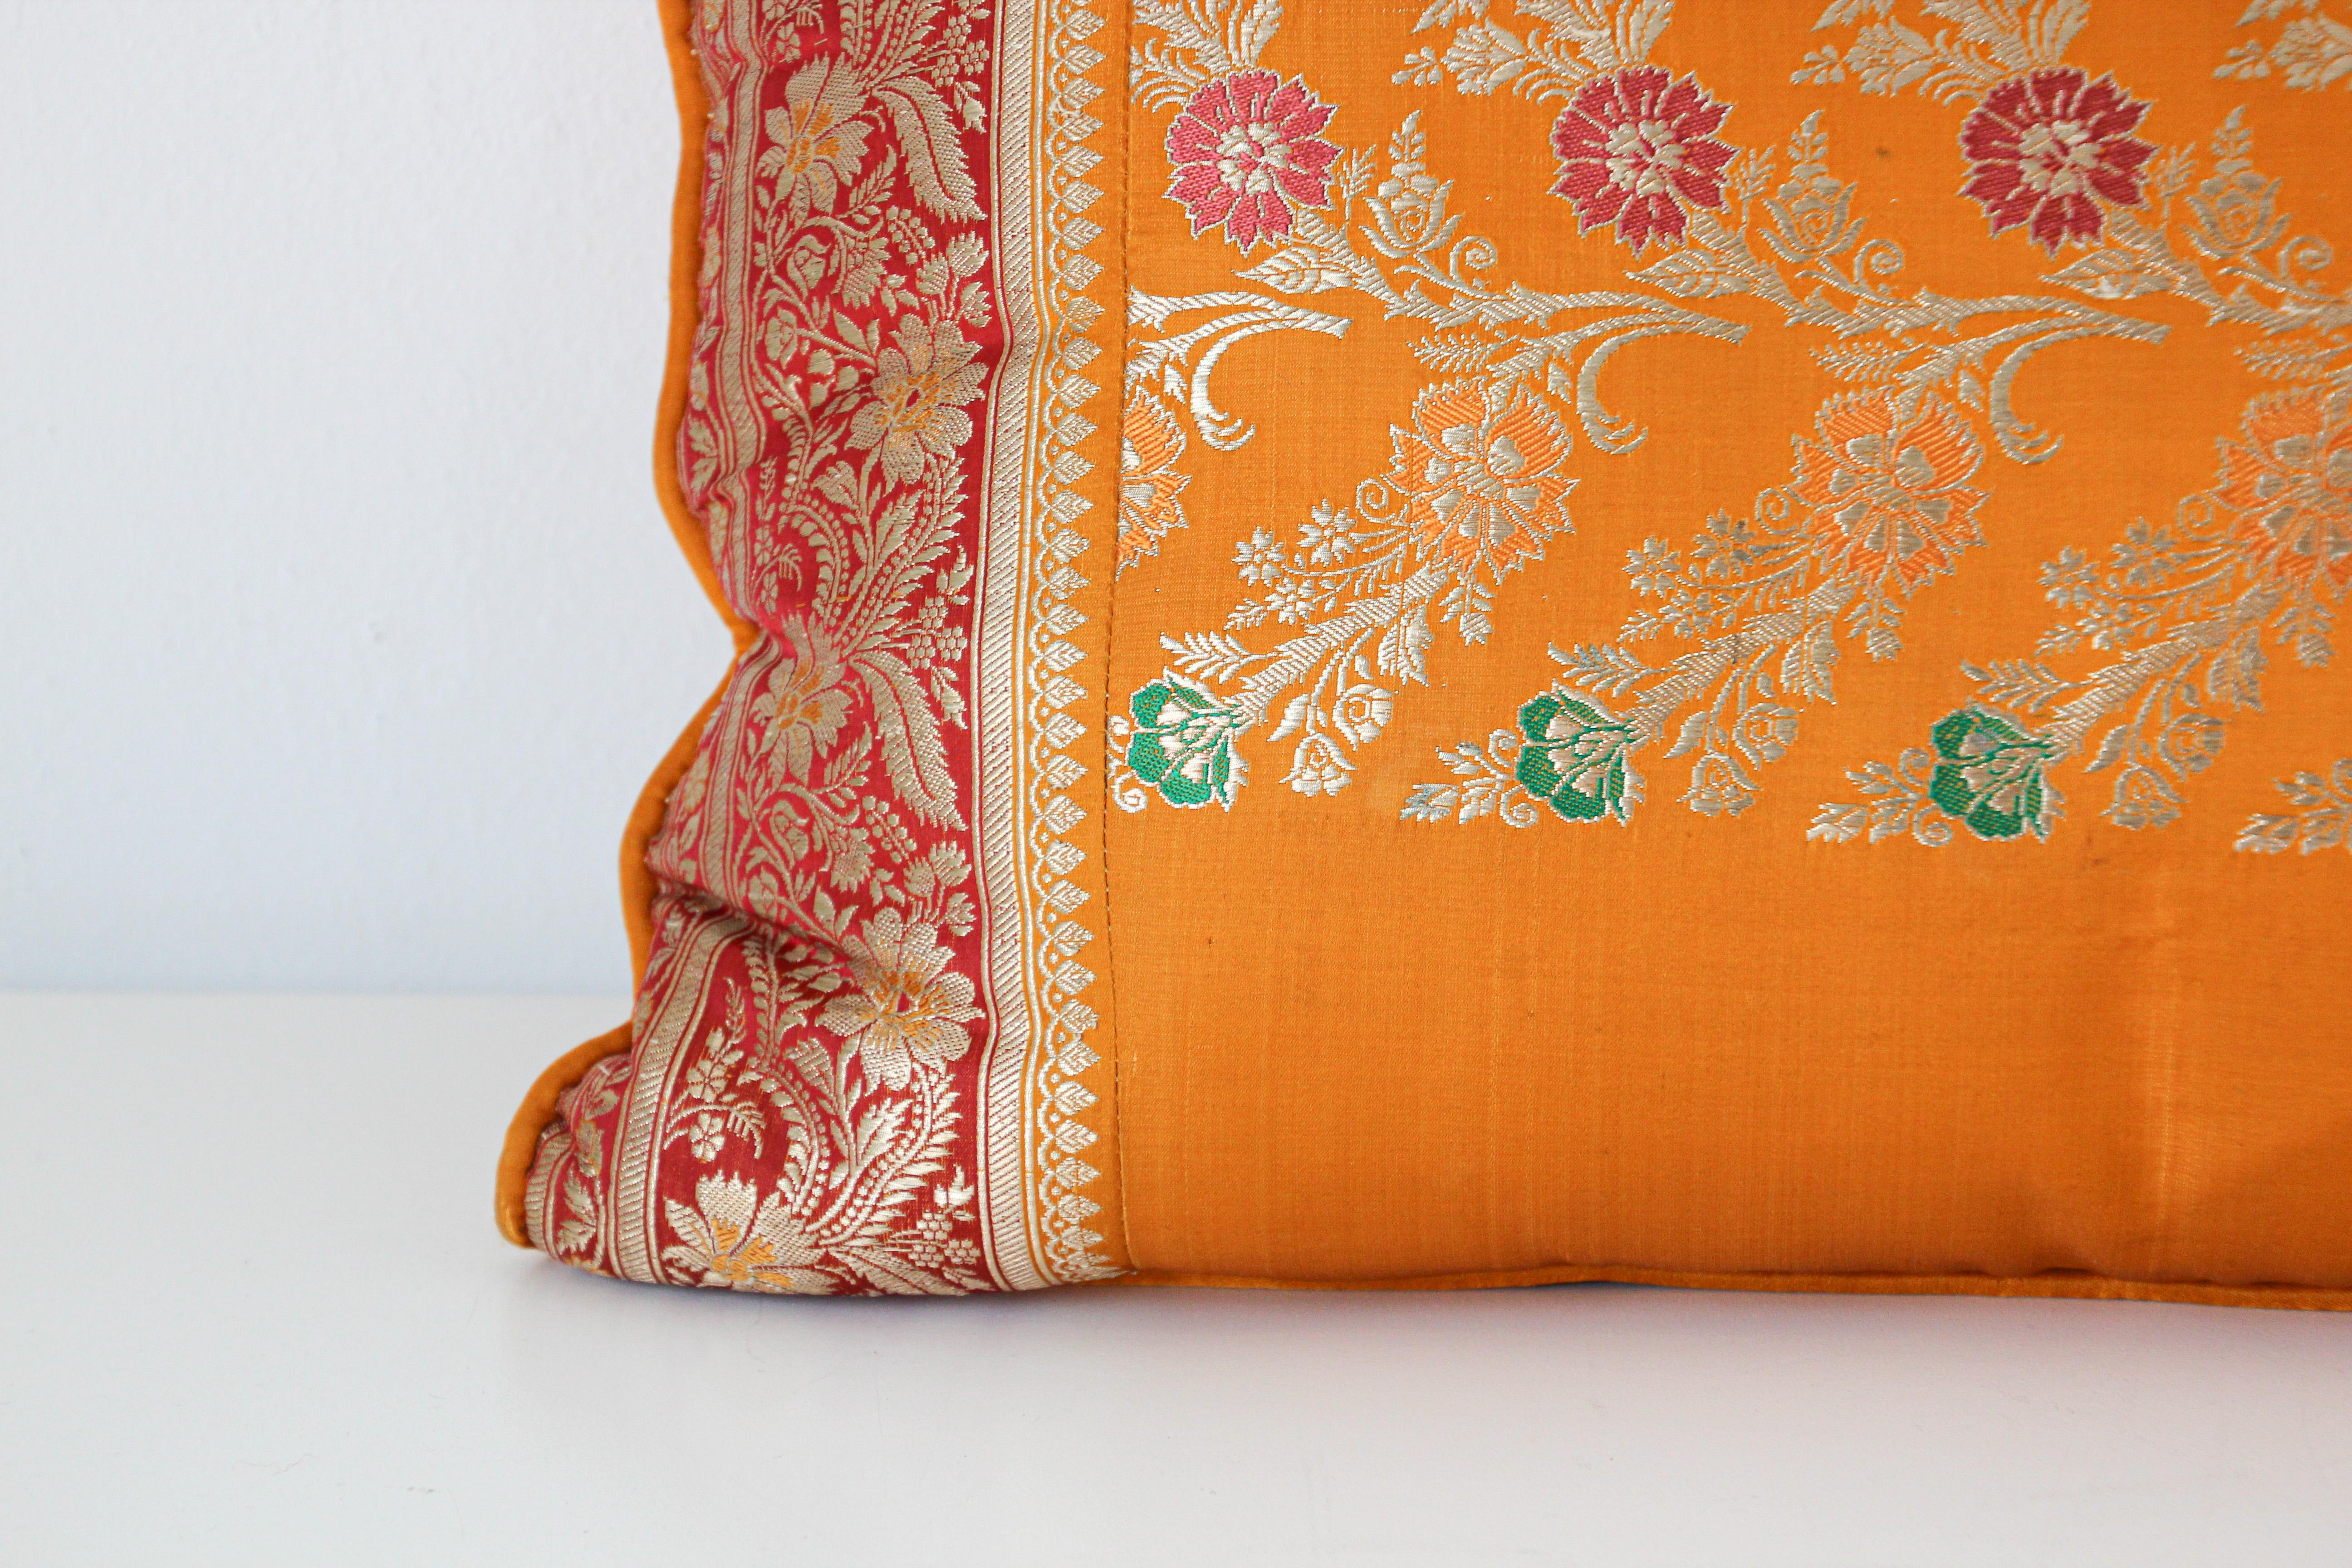 Custom made lumbar silk pillow made from a wedding silk sari in orange, fushia, gold and green colors.
Decorative twisted trims all around.
Luxury Rajasthan Mughal style decorative lumbar pillow.
Made in India.